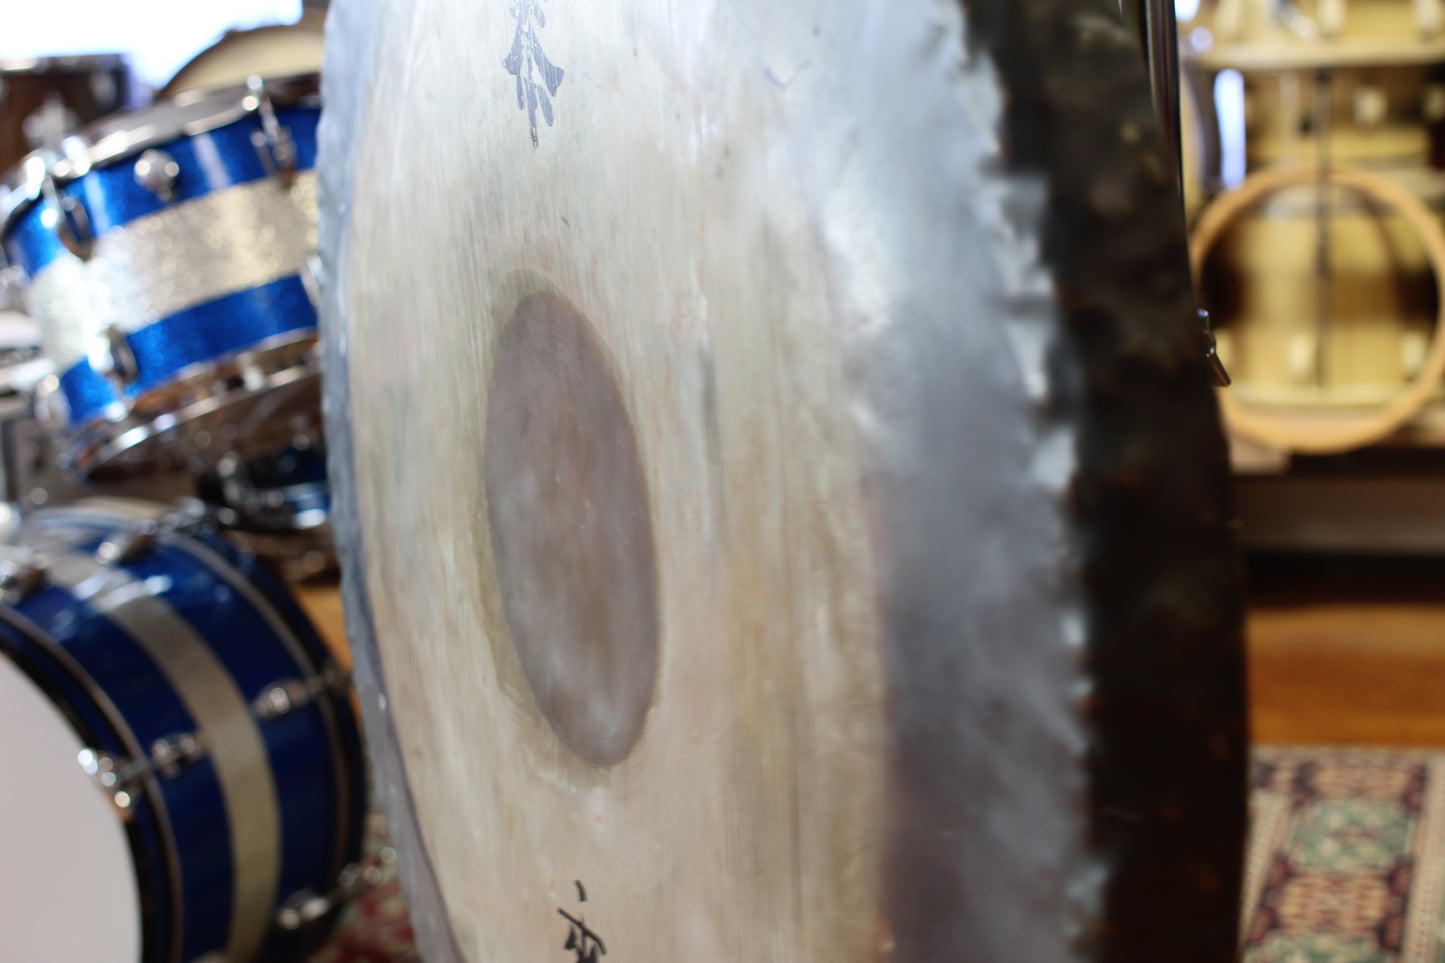 1960's Paiste / Ludwig 30" Gong